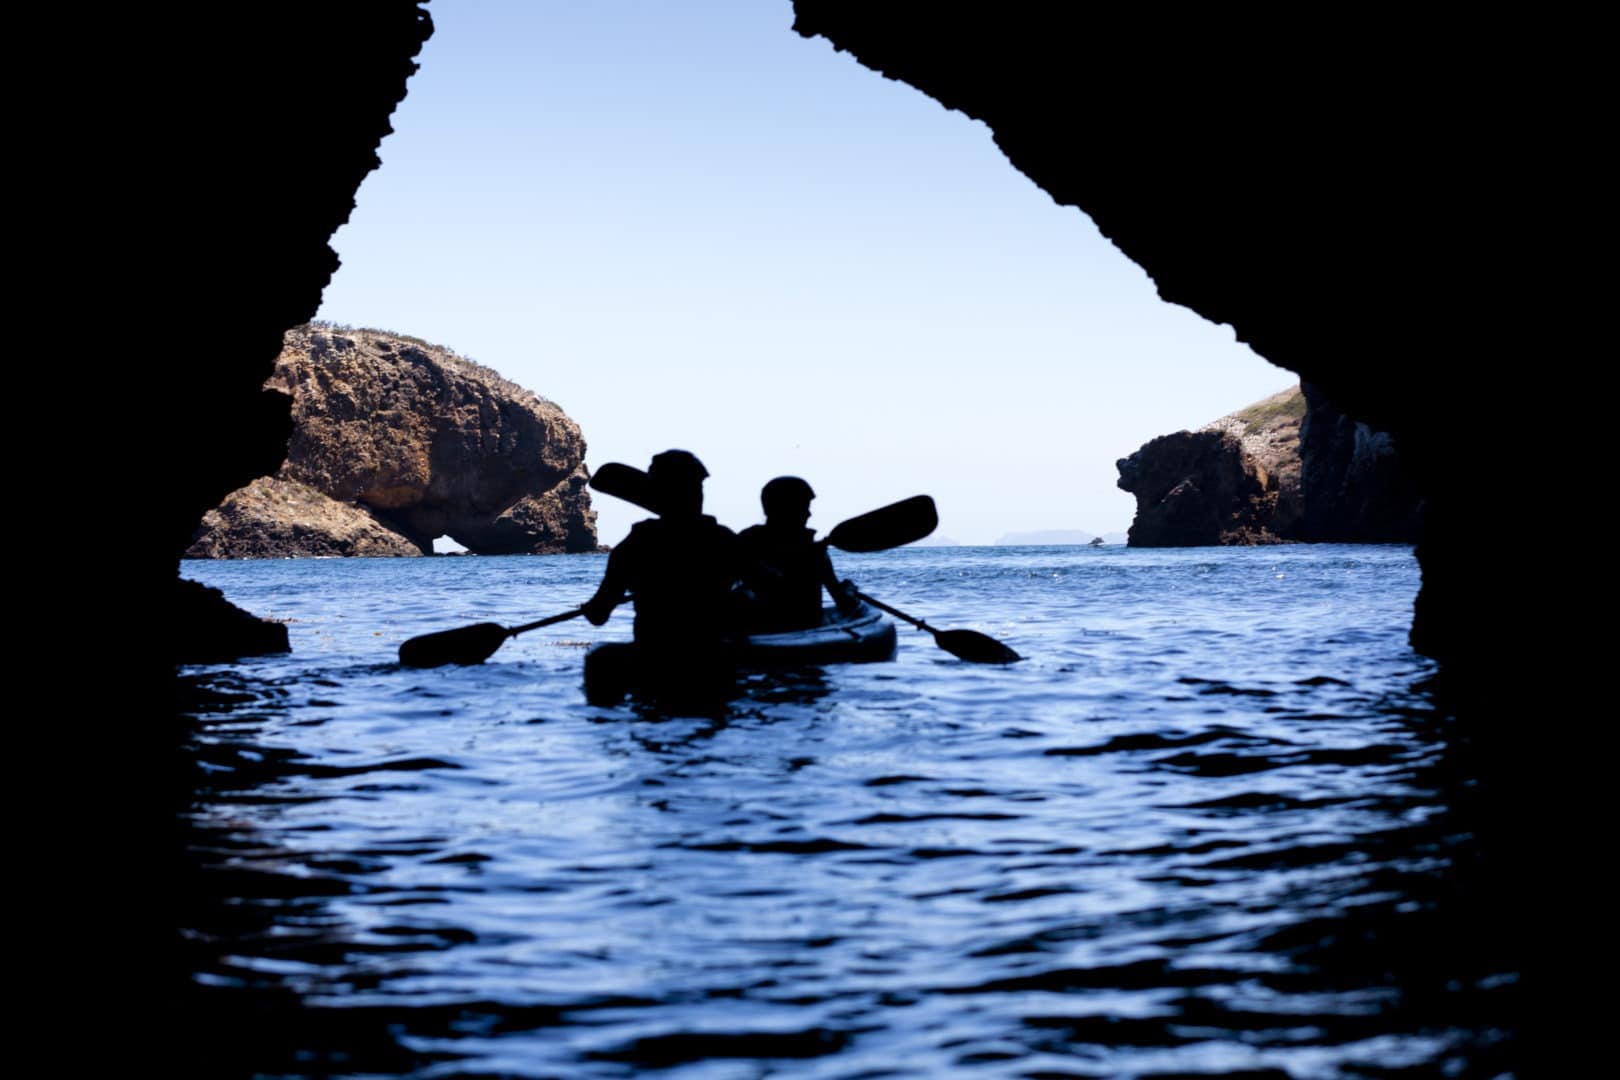 Channel Islands National Park has the Best Beaches in Ventura County and the United States.